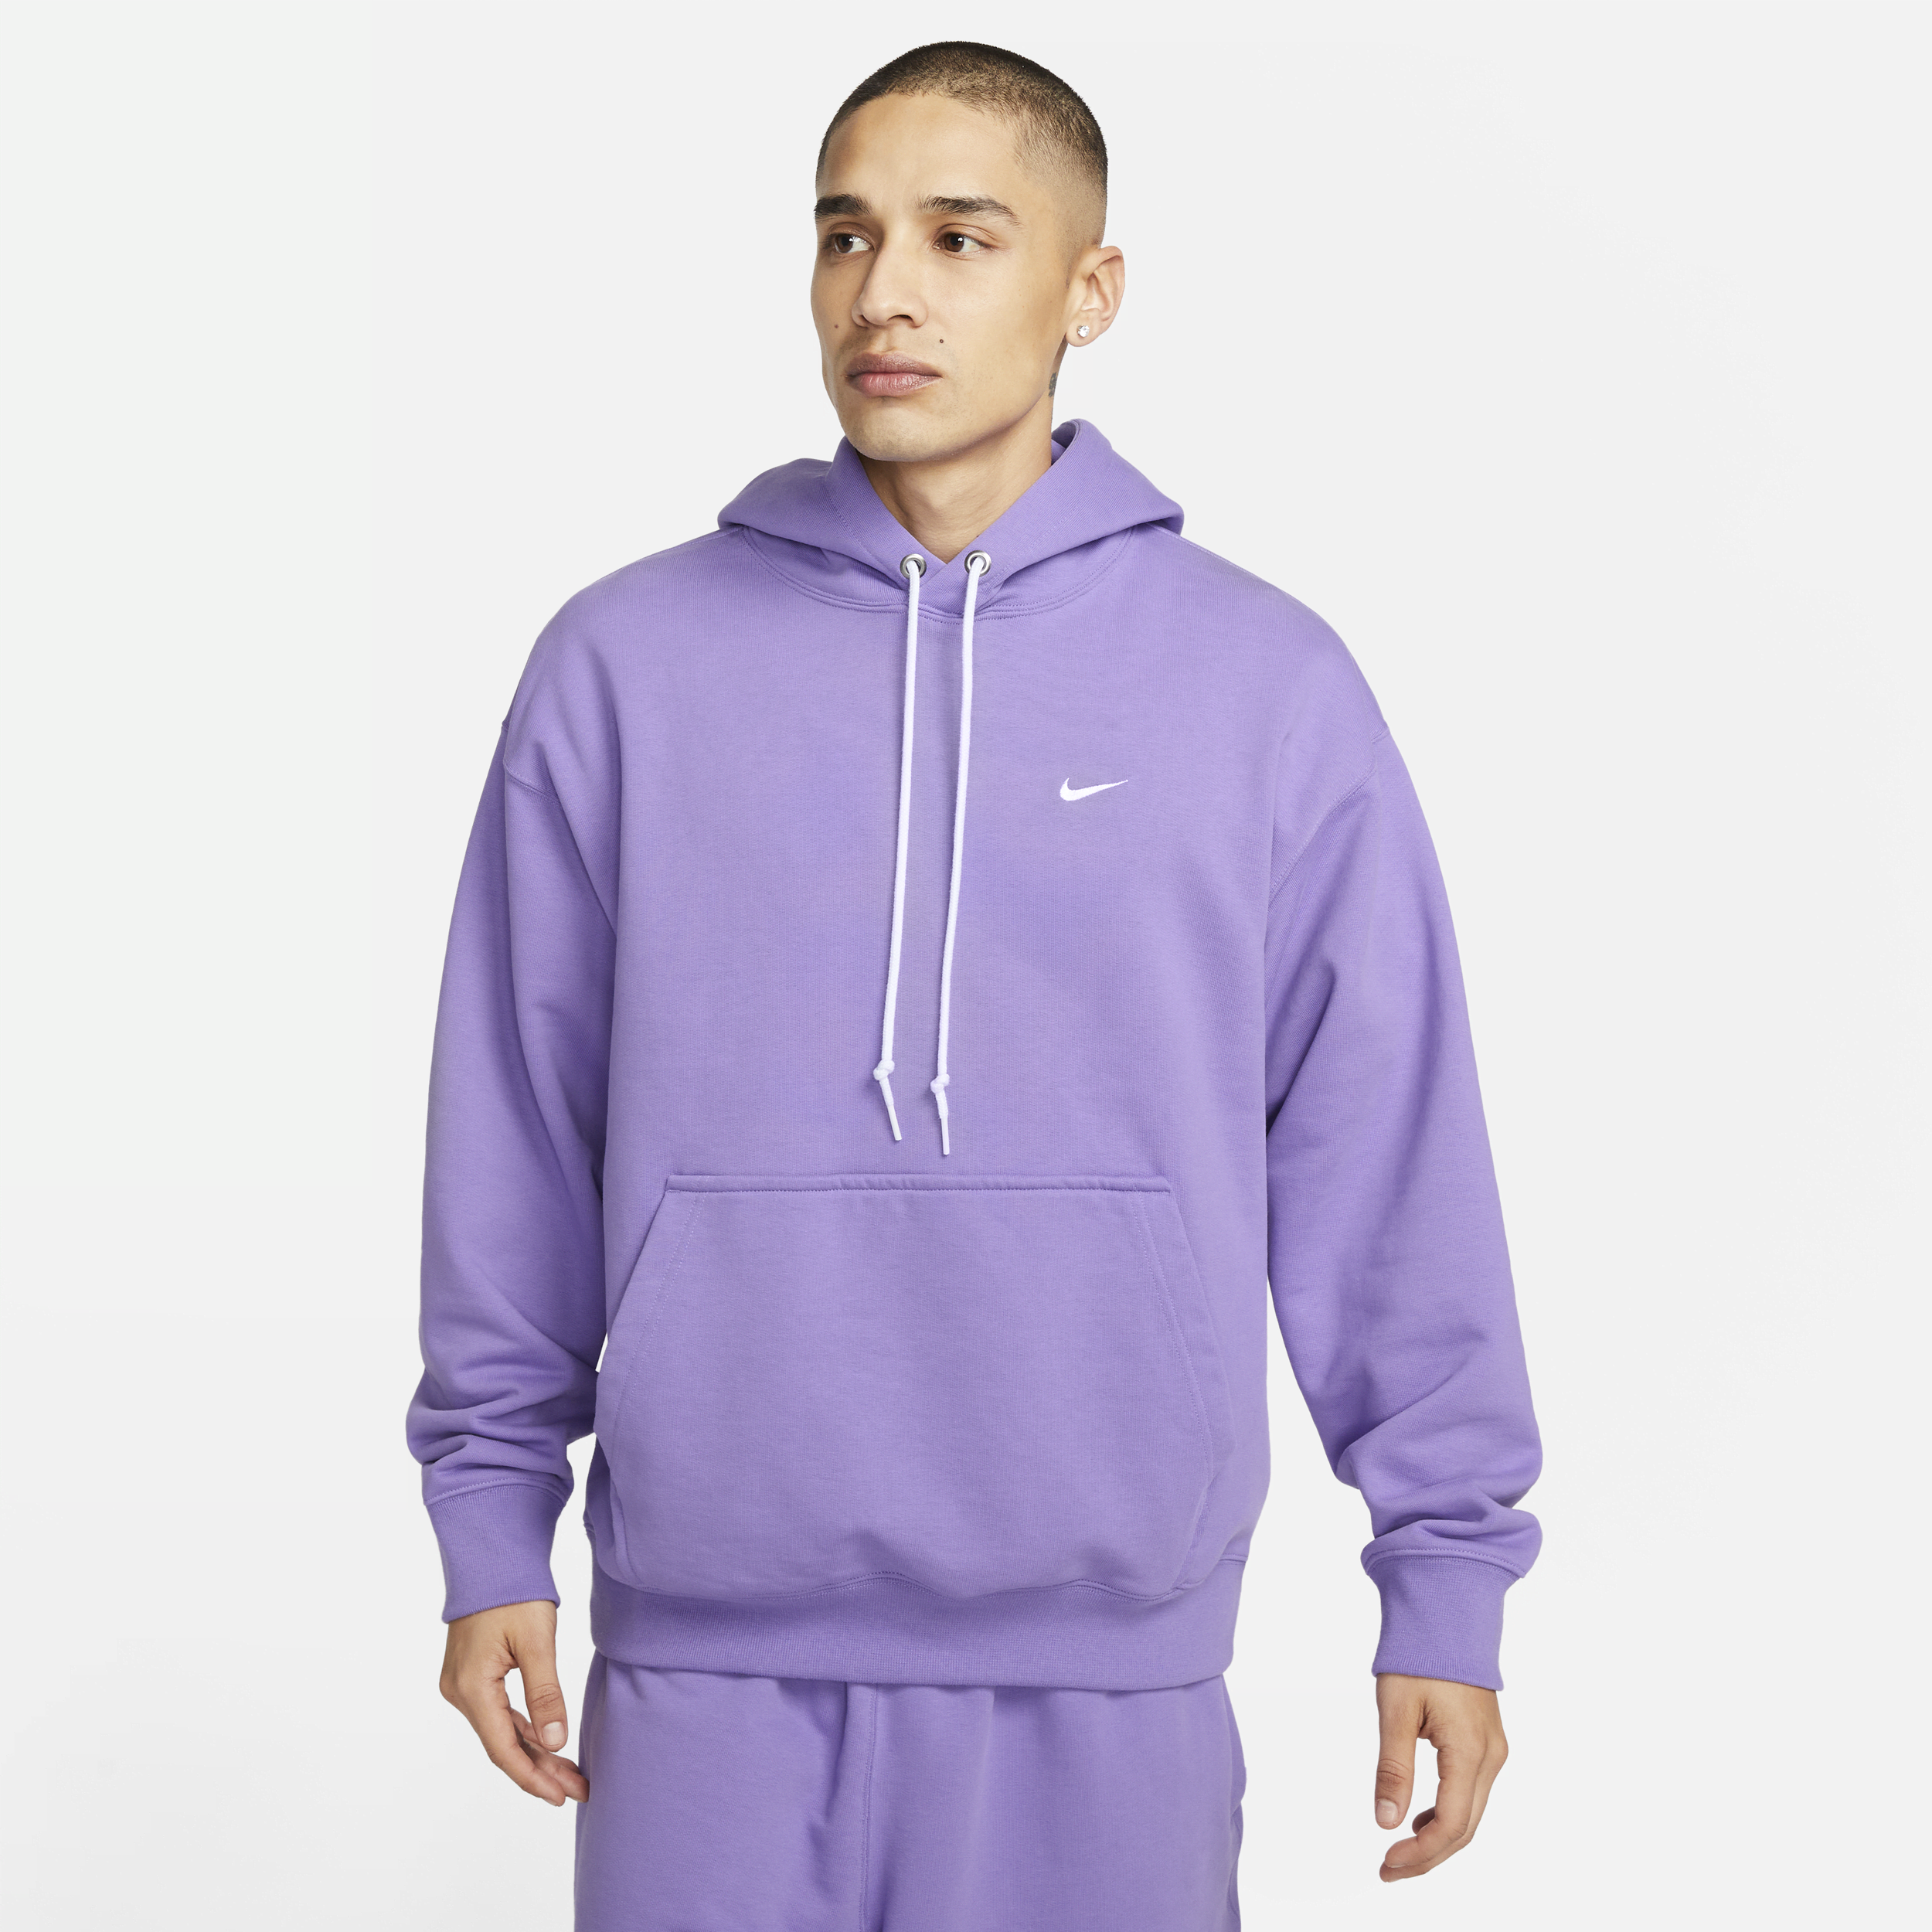 NIKE MEN'S SOLO SWOOSH FRENCH TERRY PULLOVER HOODIE,1009787187